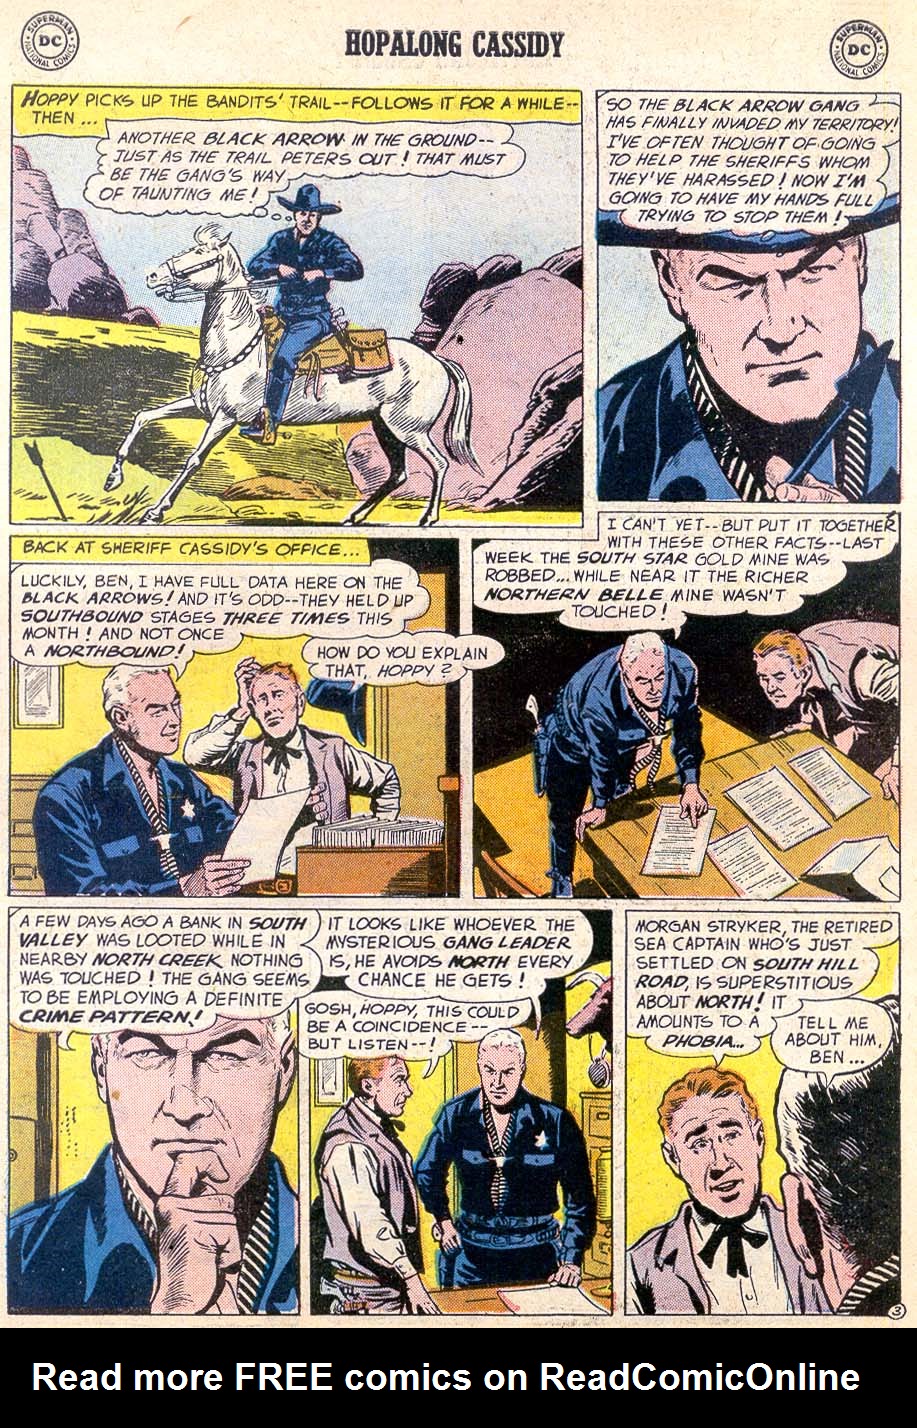 Read online Hopalong Cassidy comic -  Issue #122 - 27